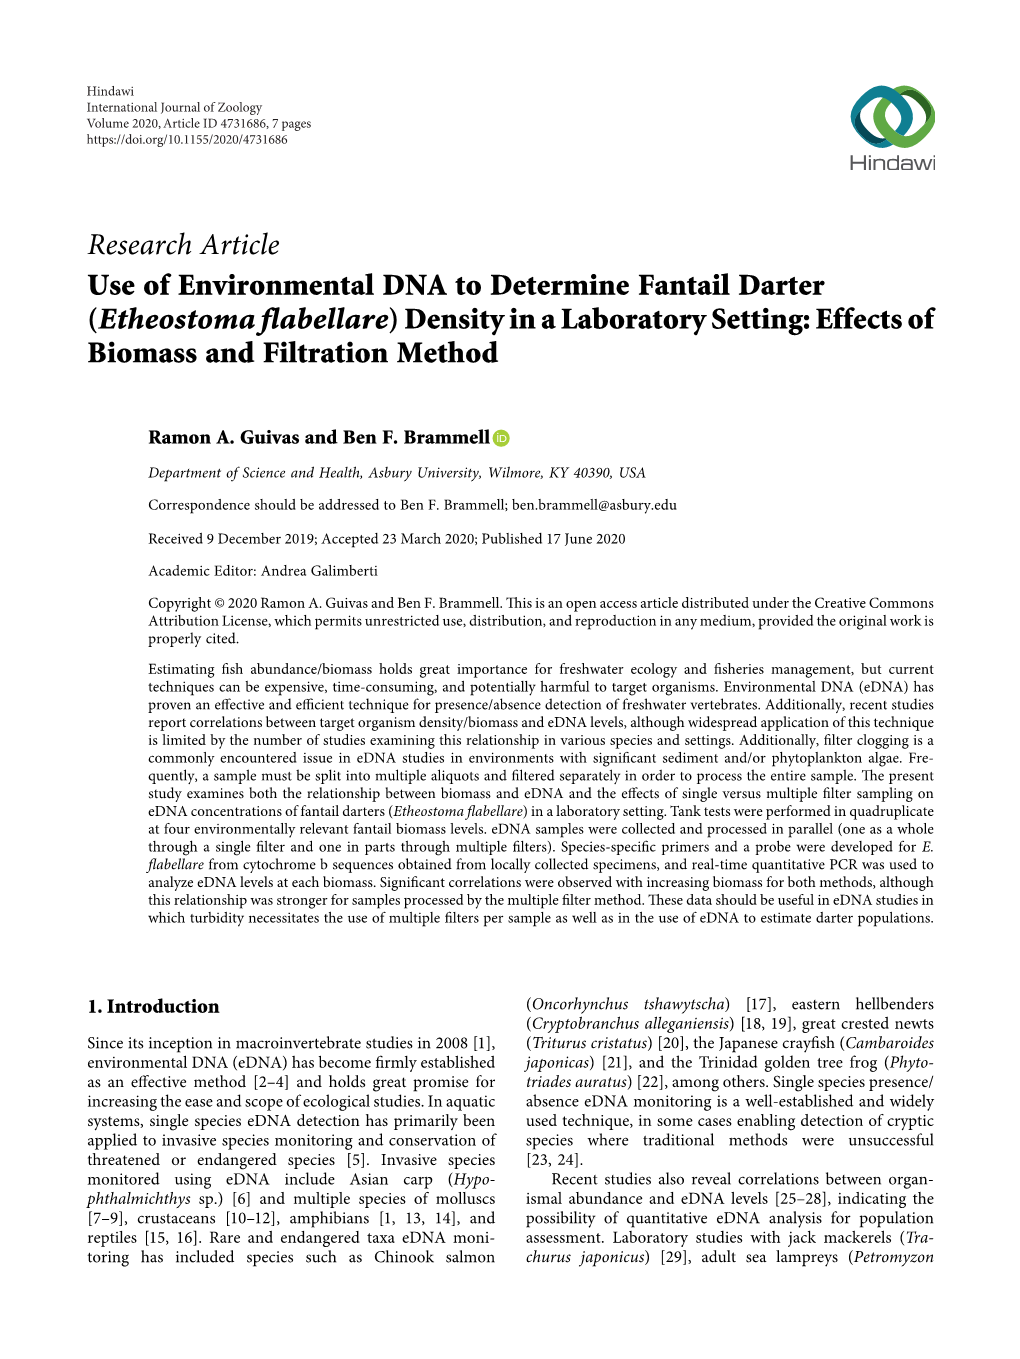 Use of Environmental DNA to Determine Fantail Darter (Etheostoma Flabellare) Density in a Laboratory Setting: Effects of Biomass and Filtration Method